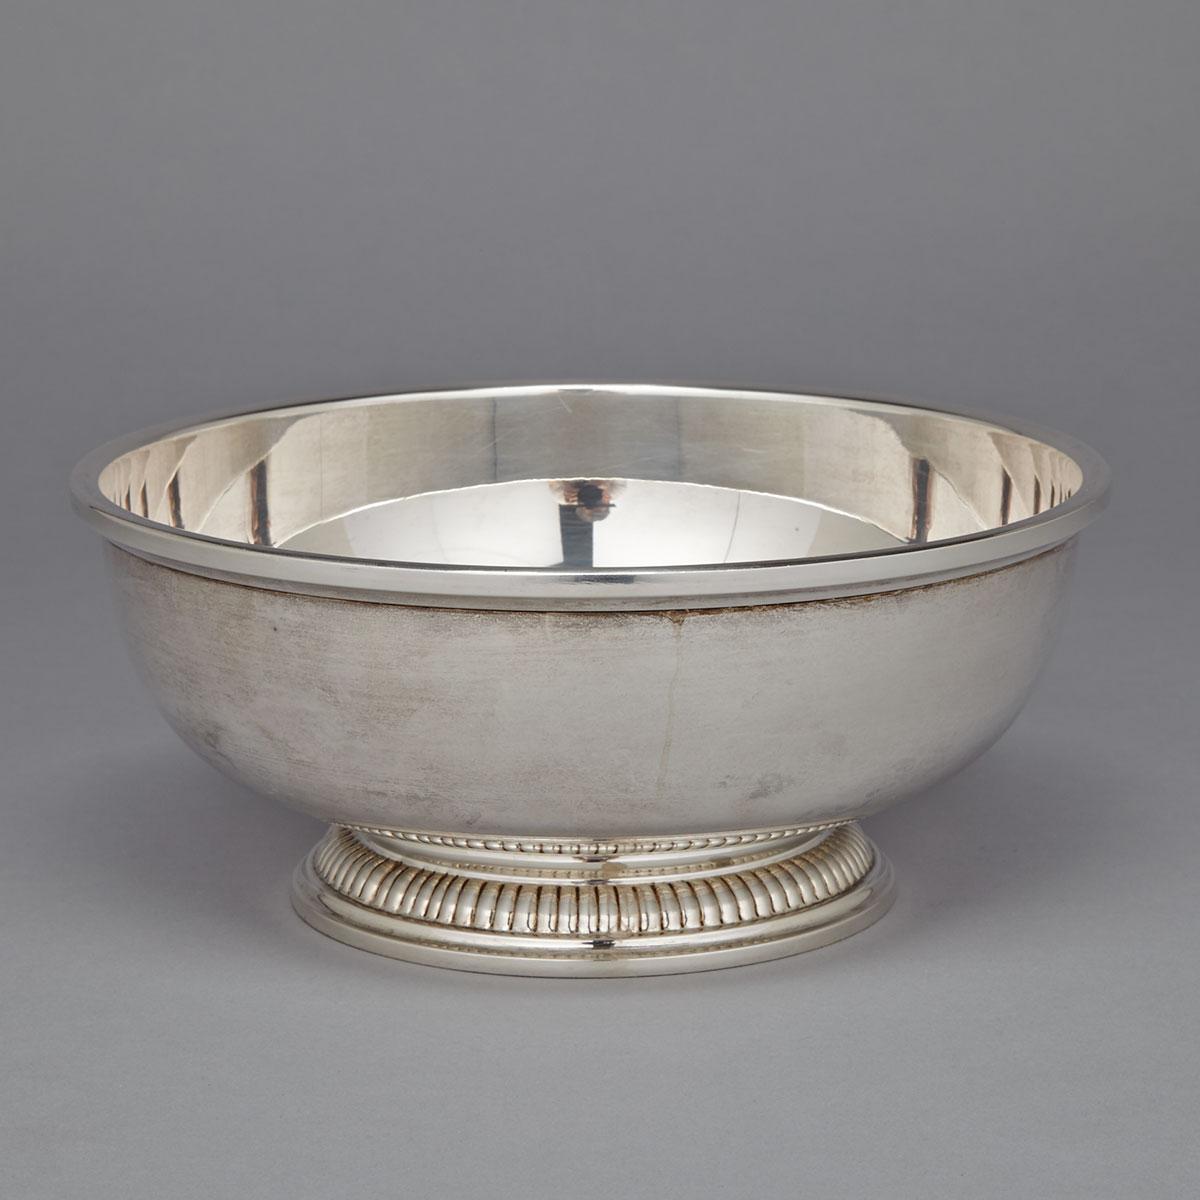 Canadian Silver Fruit Bowl, Henry Birks & Sons, Montreal, Que., 1964